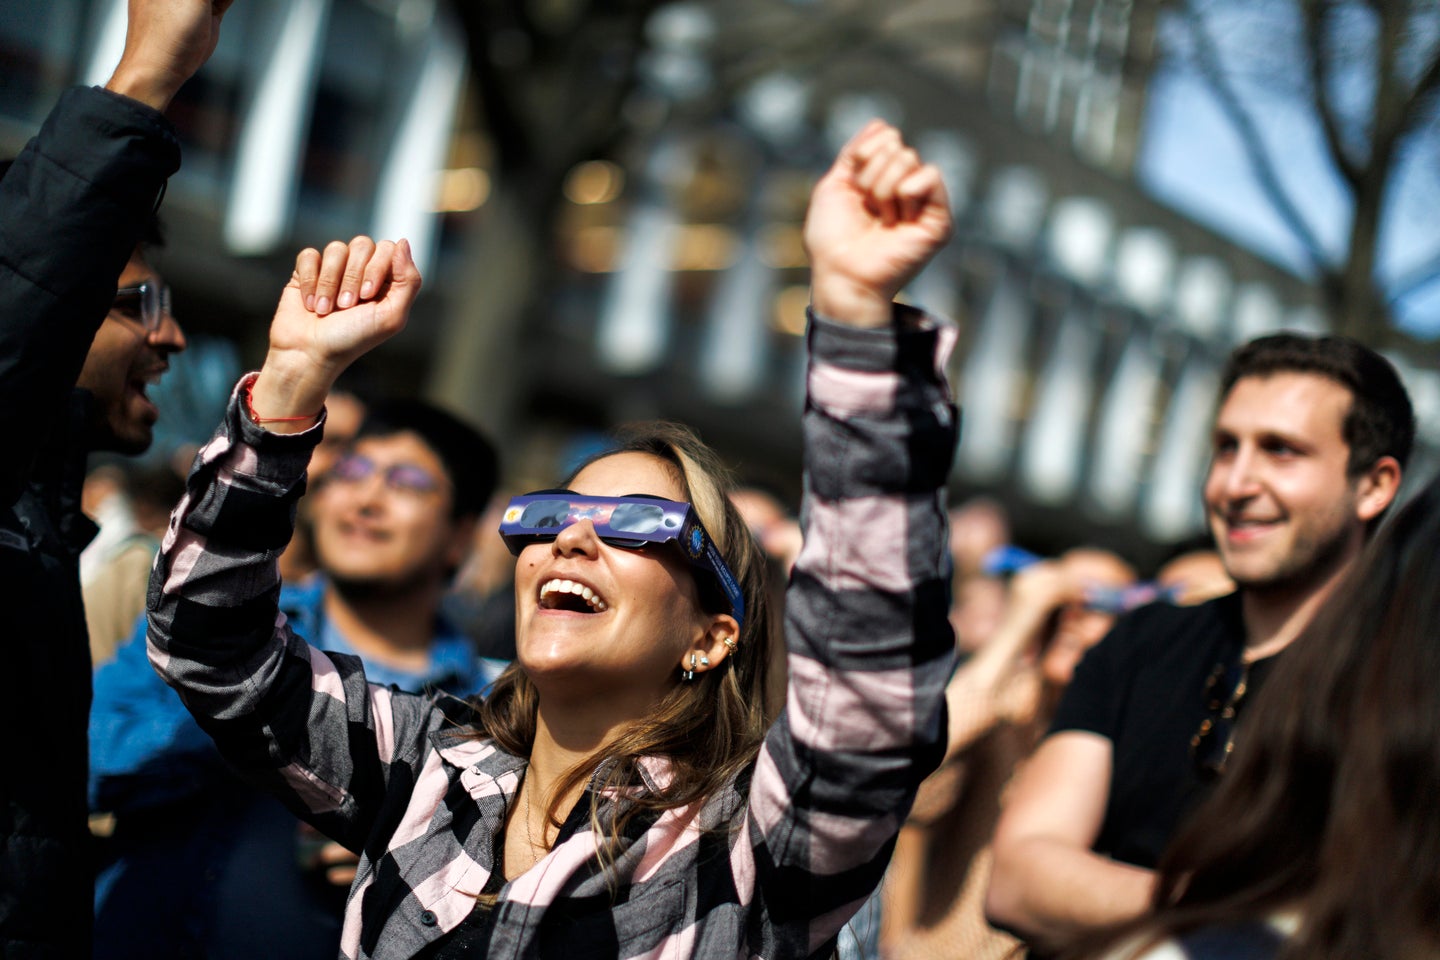 A woman wearing solar glasses raises her hands towards the sky.